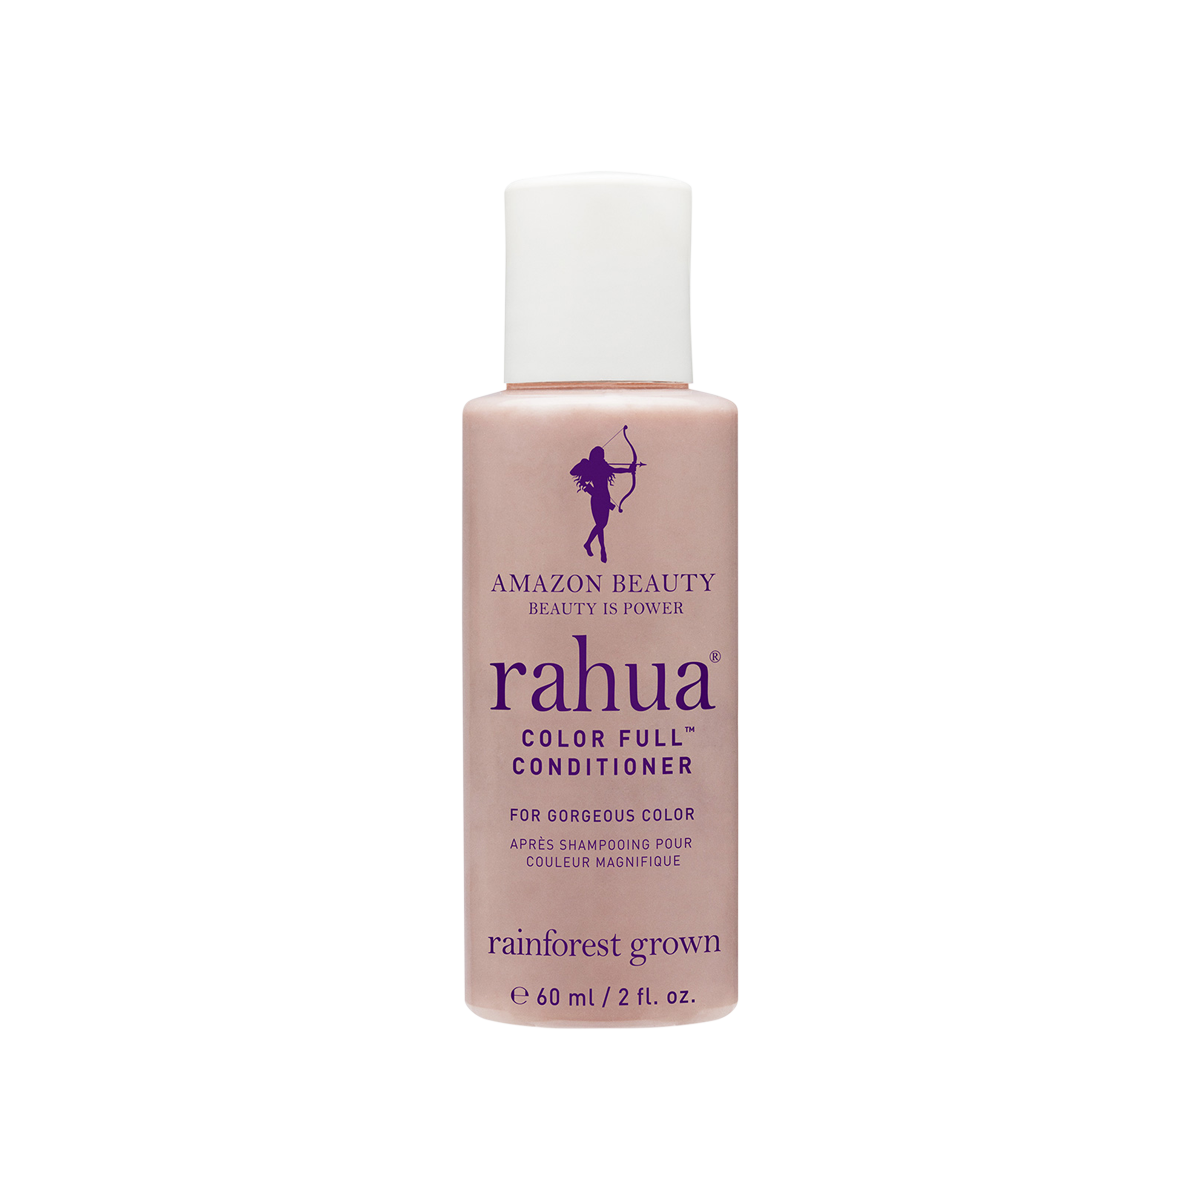 Rahua - Colorful Conditioner Travel Size